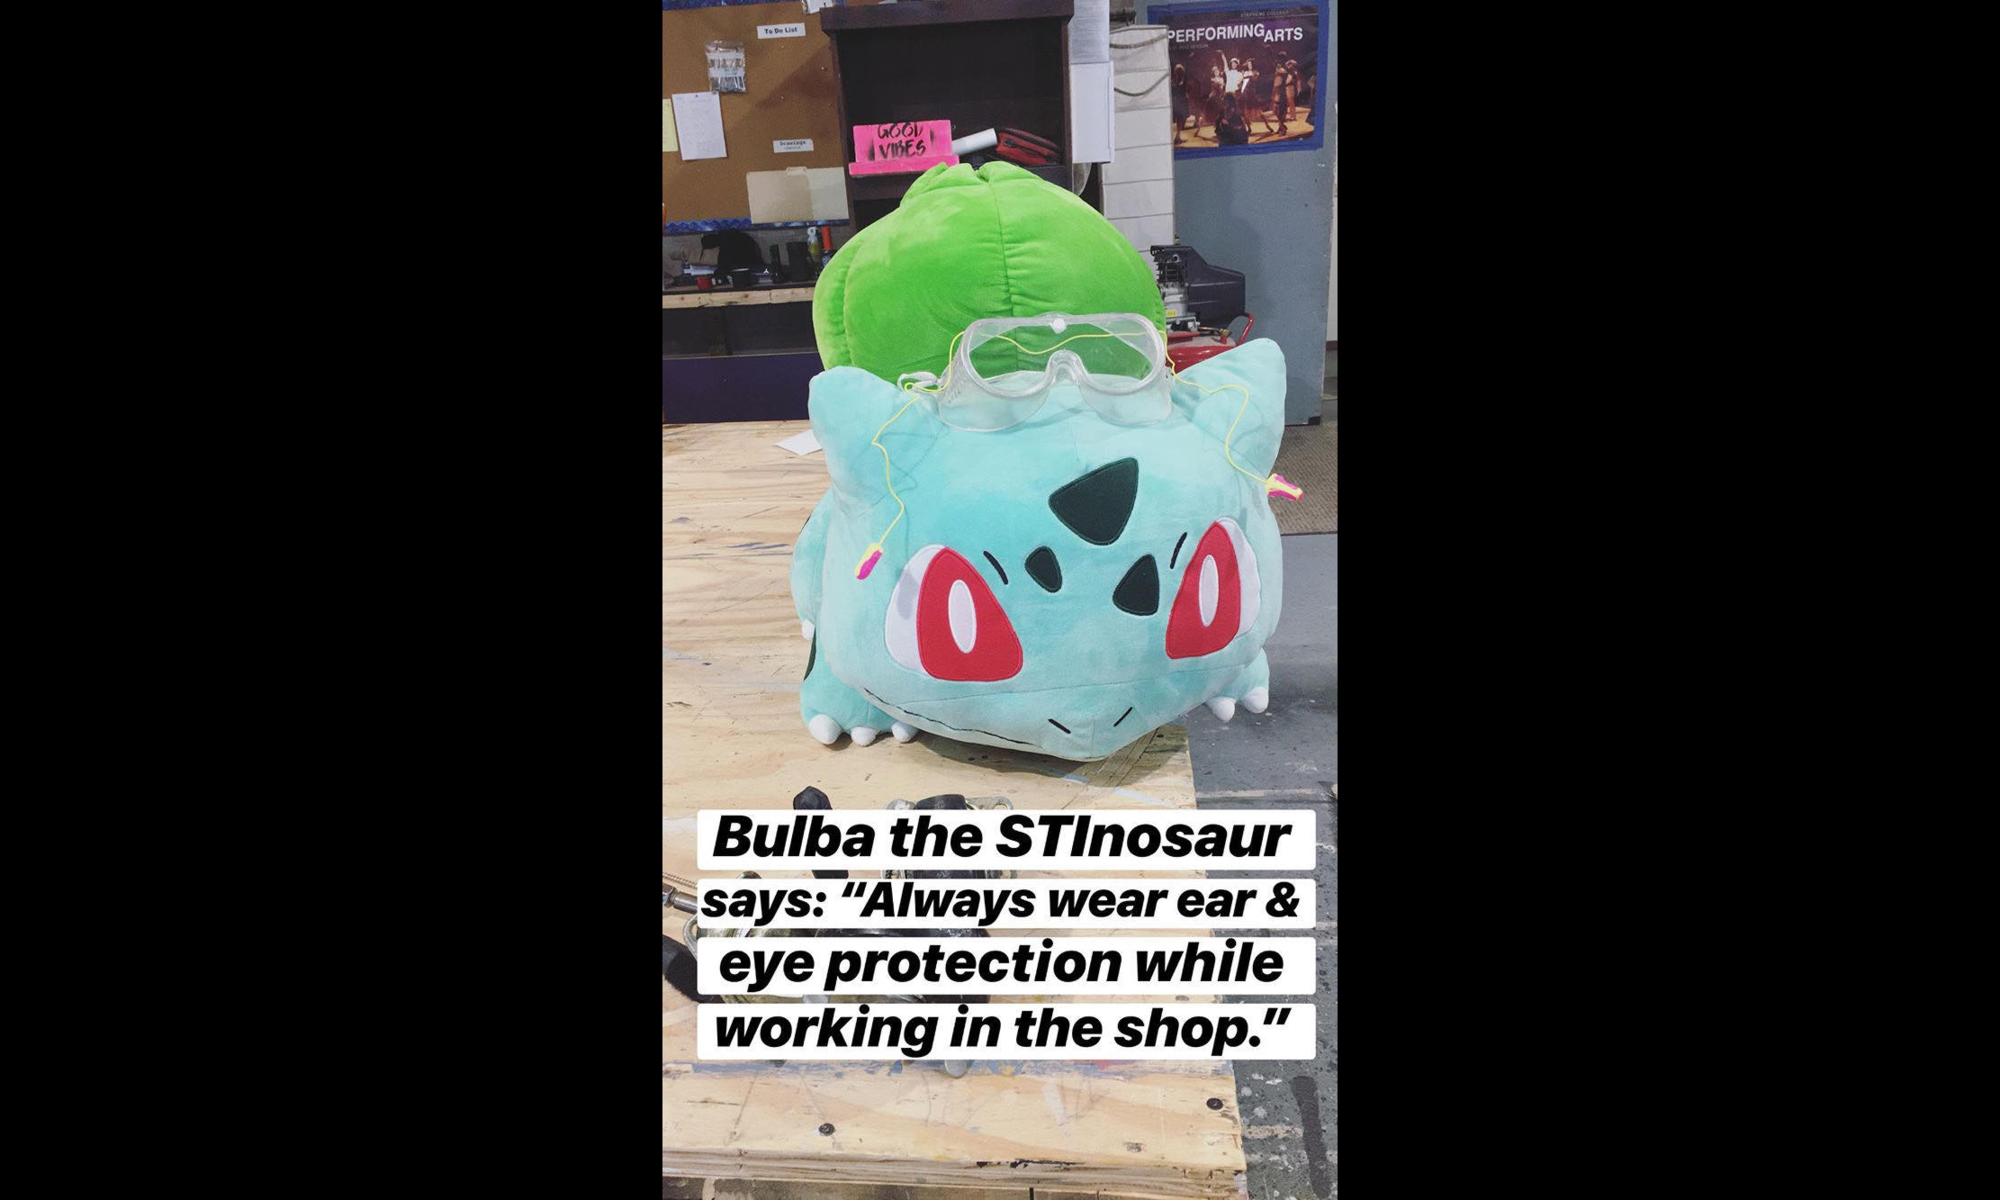 photo of a stuffed bulbasaur with the caption "Bulba the STInosaur says: 'Always wear ear & eye protection while working in the shop.'"